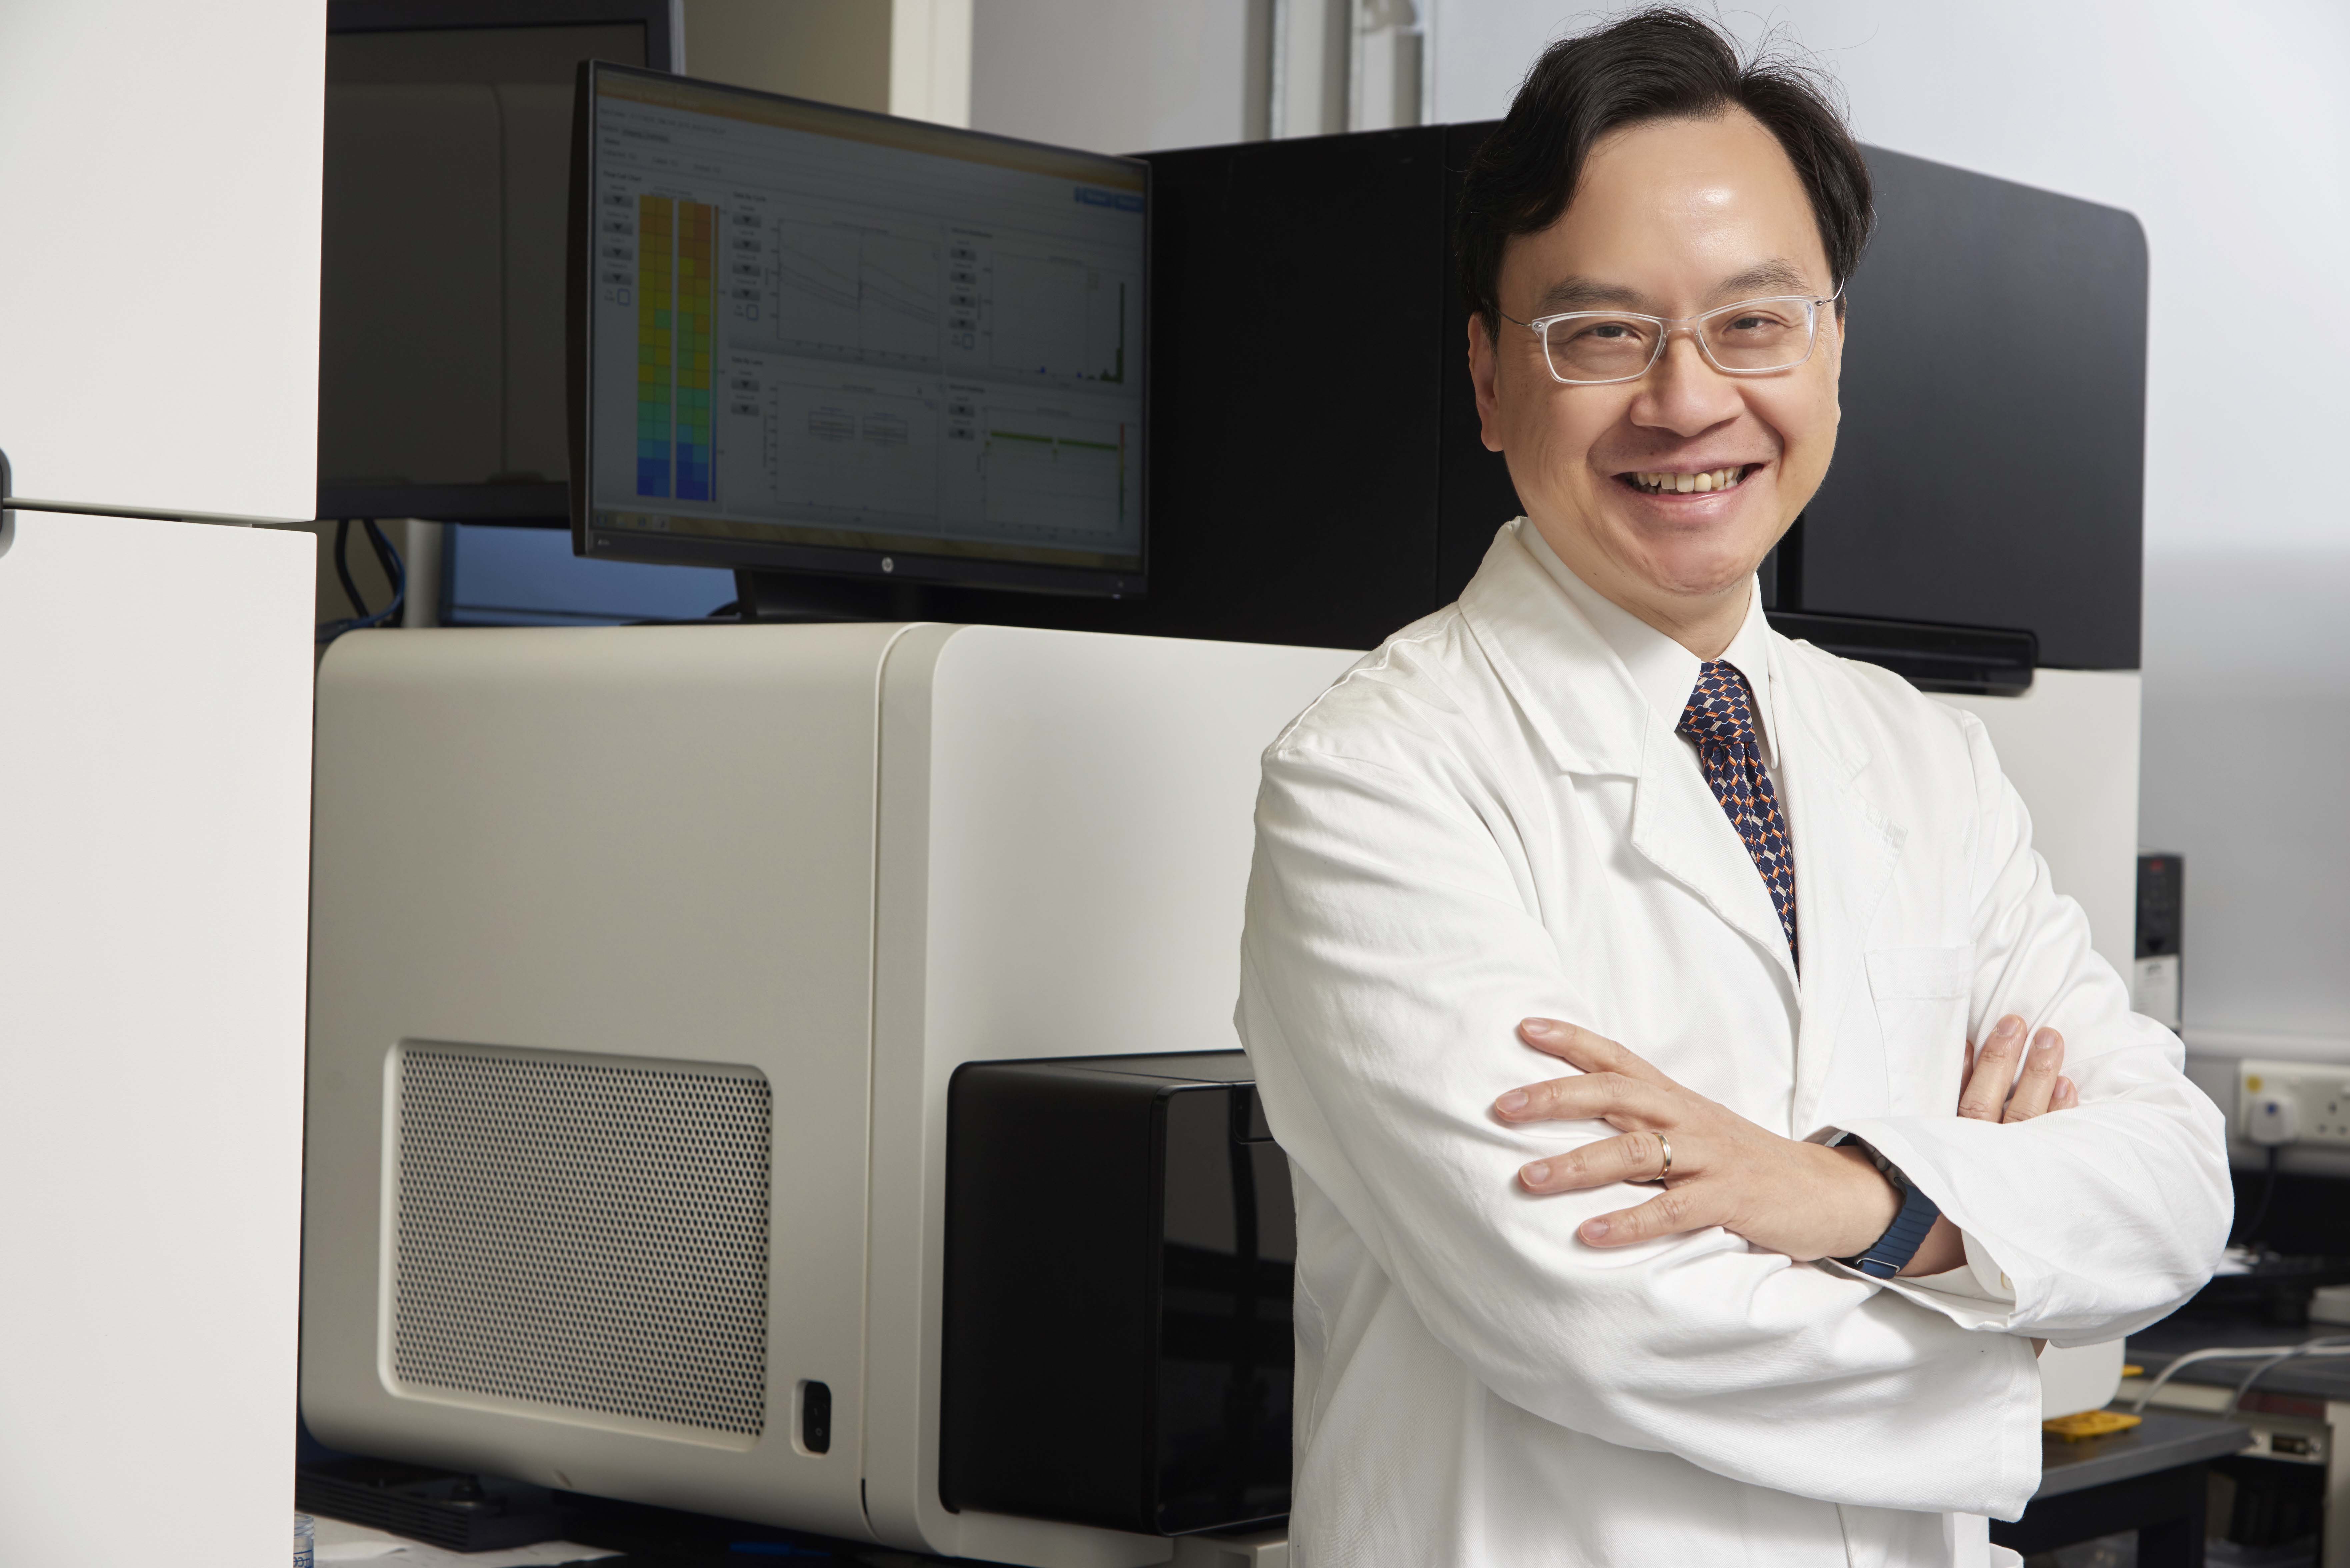 Professor Dennis LO from the Faculty of Medicine at The Chinese University of Hong Kong has been named the “Top 20 Translational Researchers of 2017” recently by the world-renowned scientific journal Nature Biotechnology, for his achievement in developing a robust non-invasive prenatal test following his discovery of fetal DNA in maternal plasma. This is the second year that Professor Lo receives this honour and he is also the only Hong Kong scientist on the list.